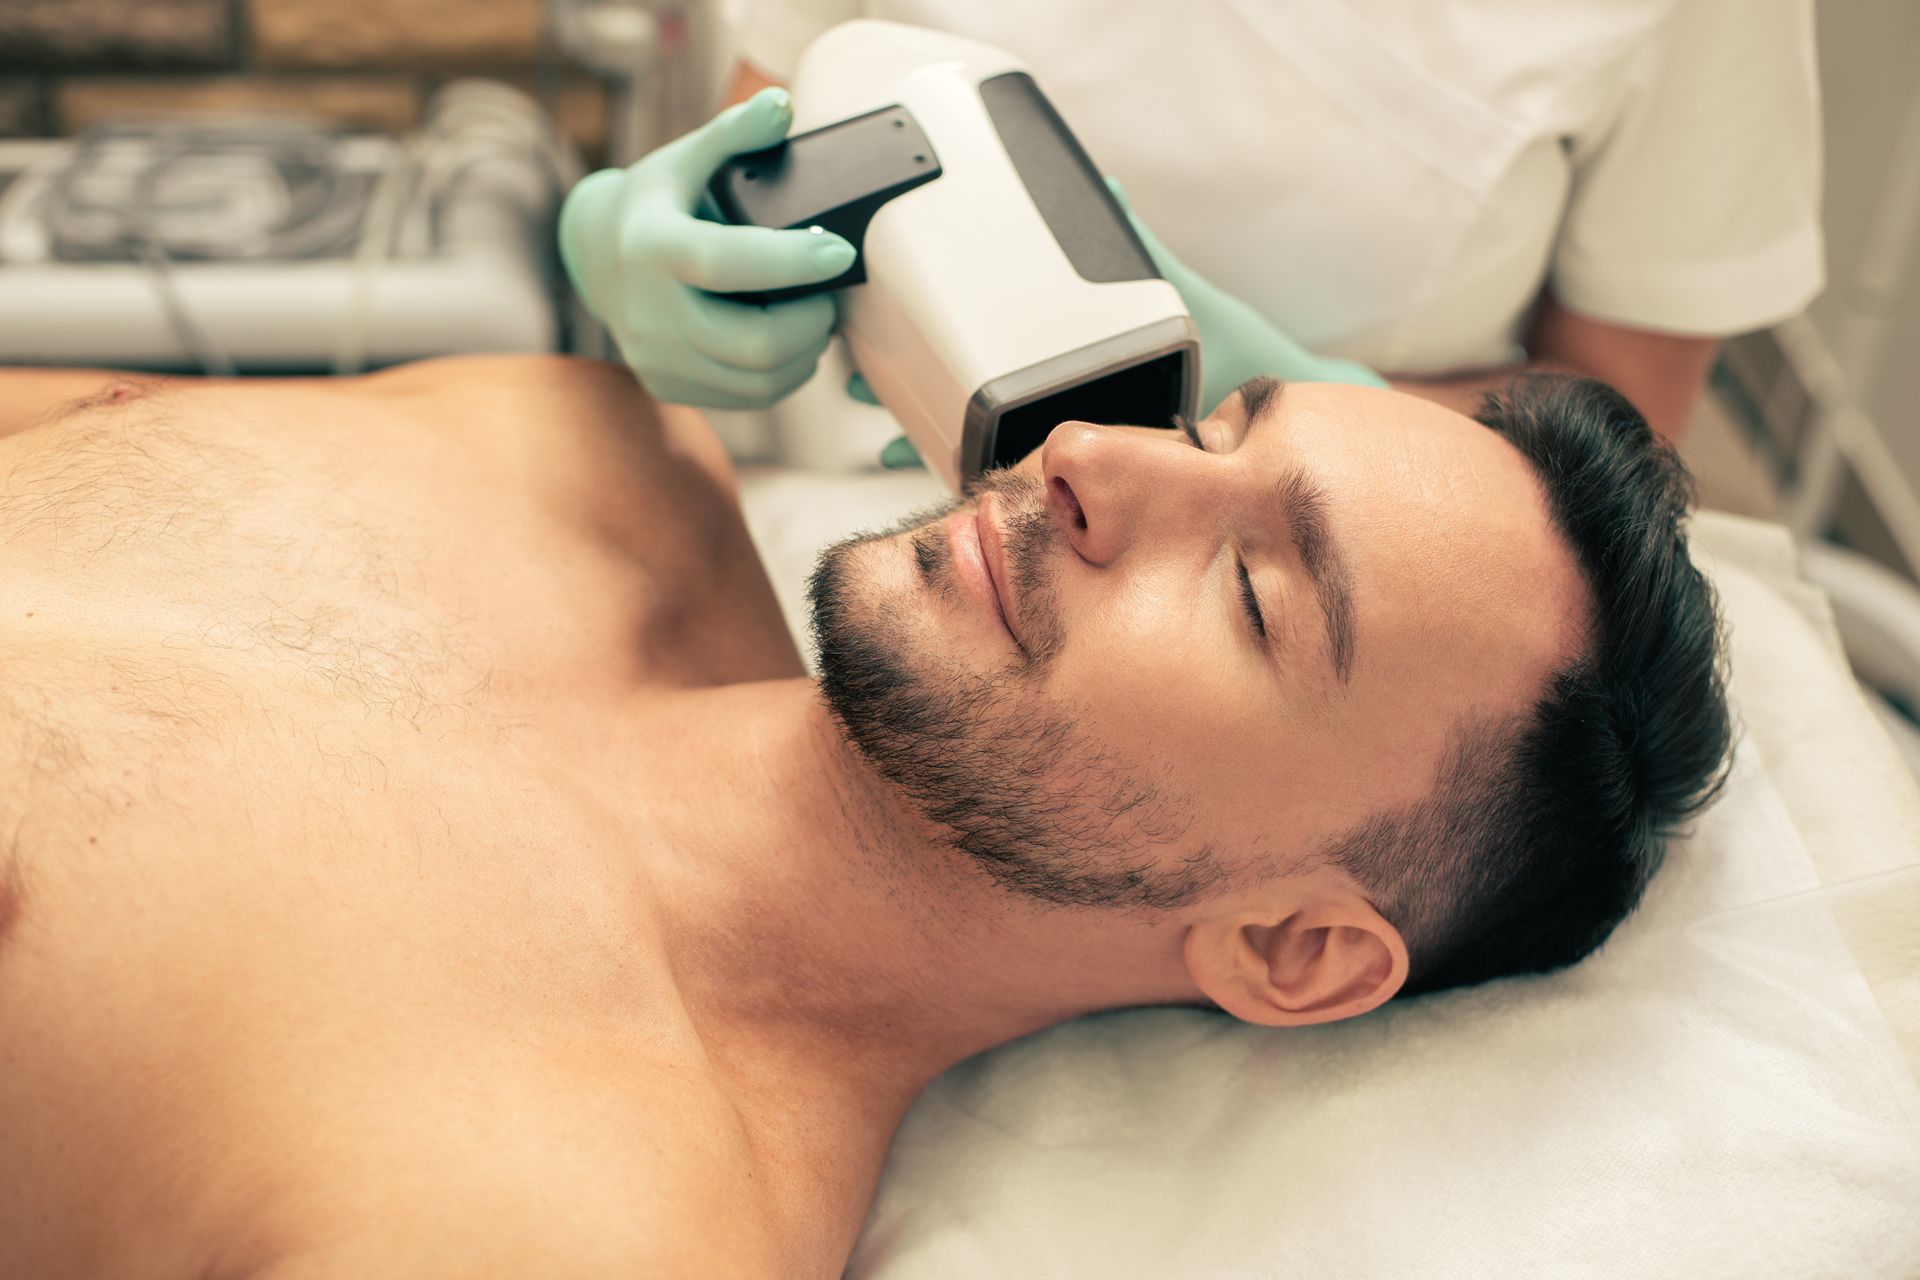 a shirtless man is getting a laser treatment on his face .